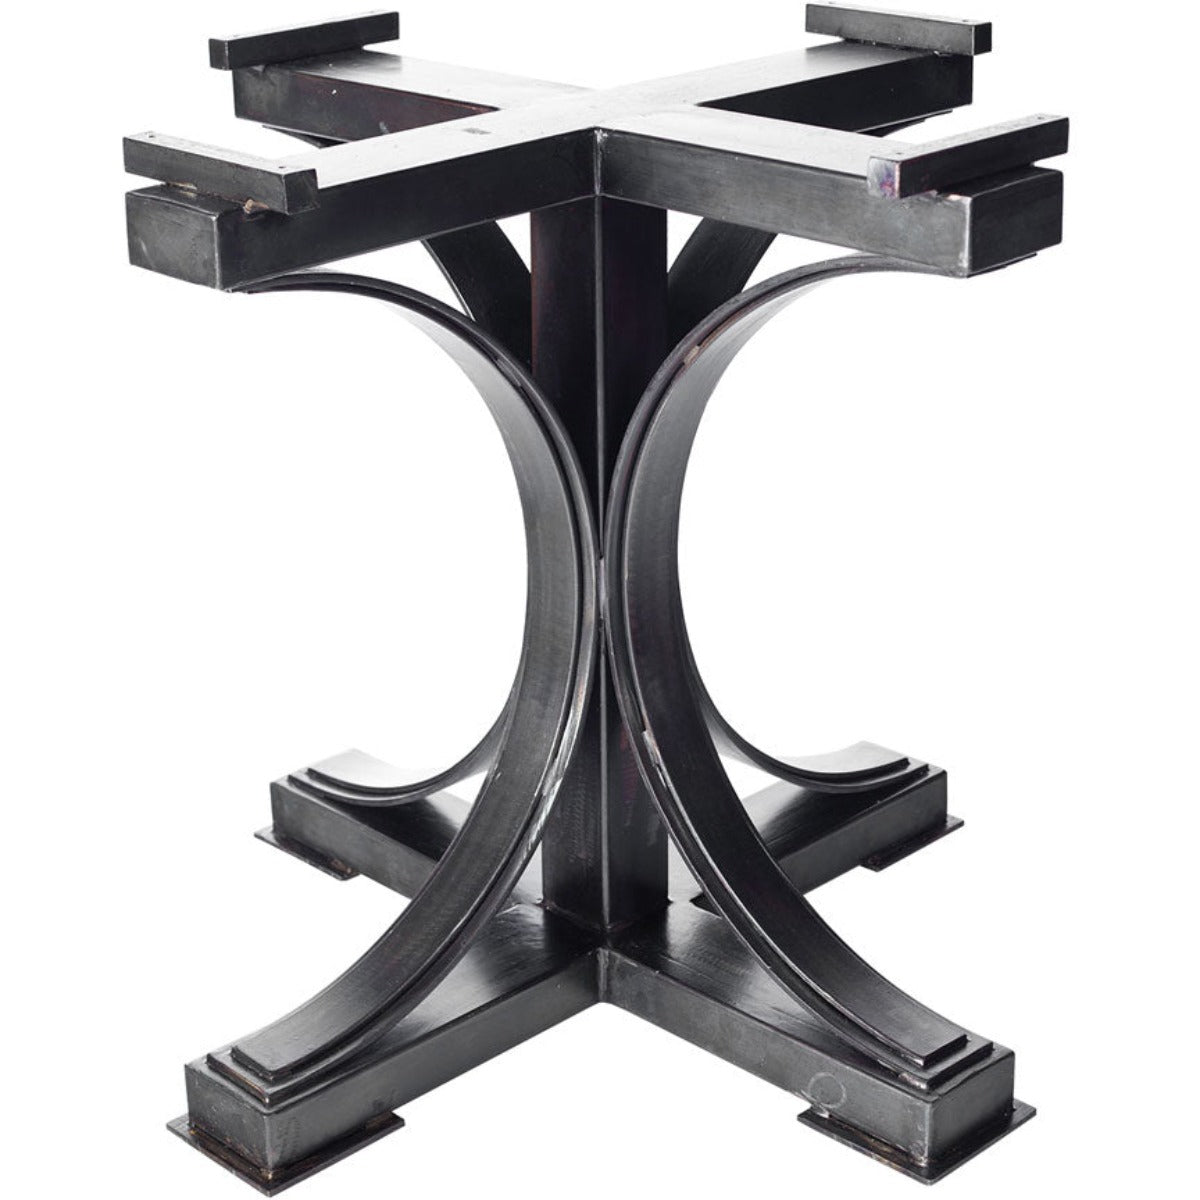 Winston Dining Table or Base for 42"-72" Tops-Iron Accents